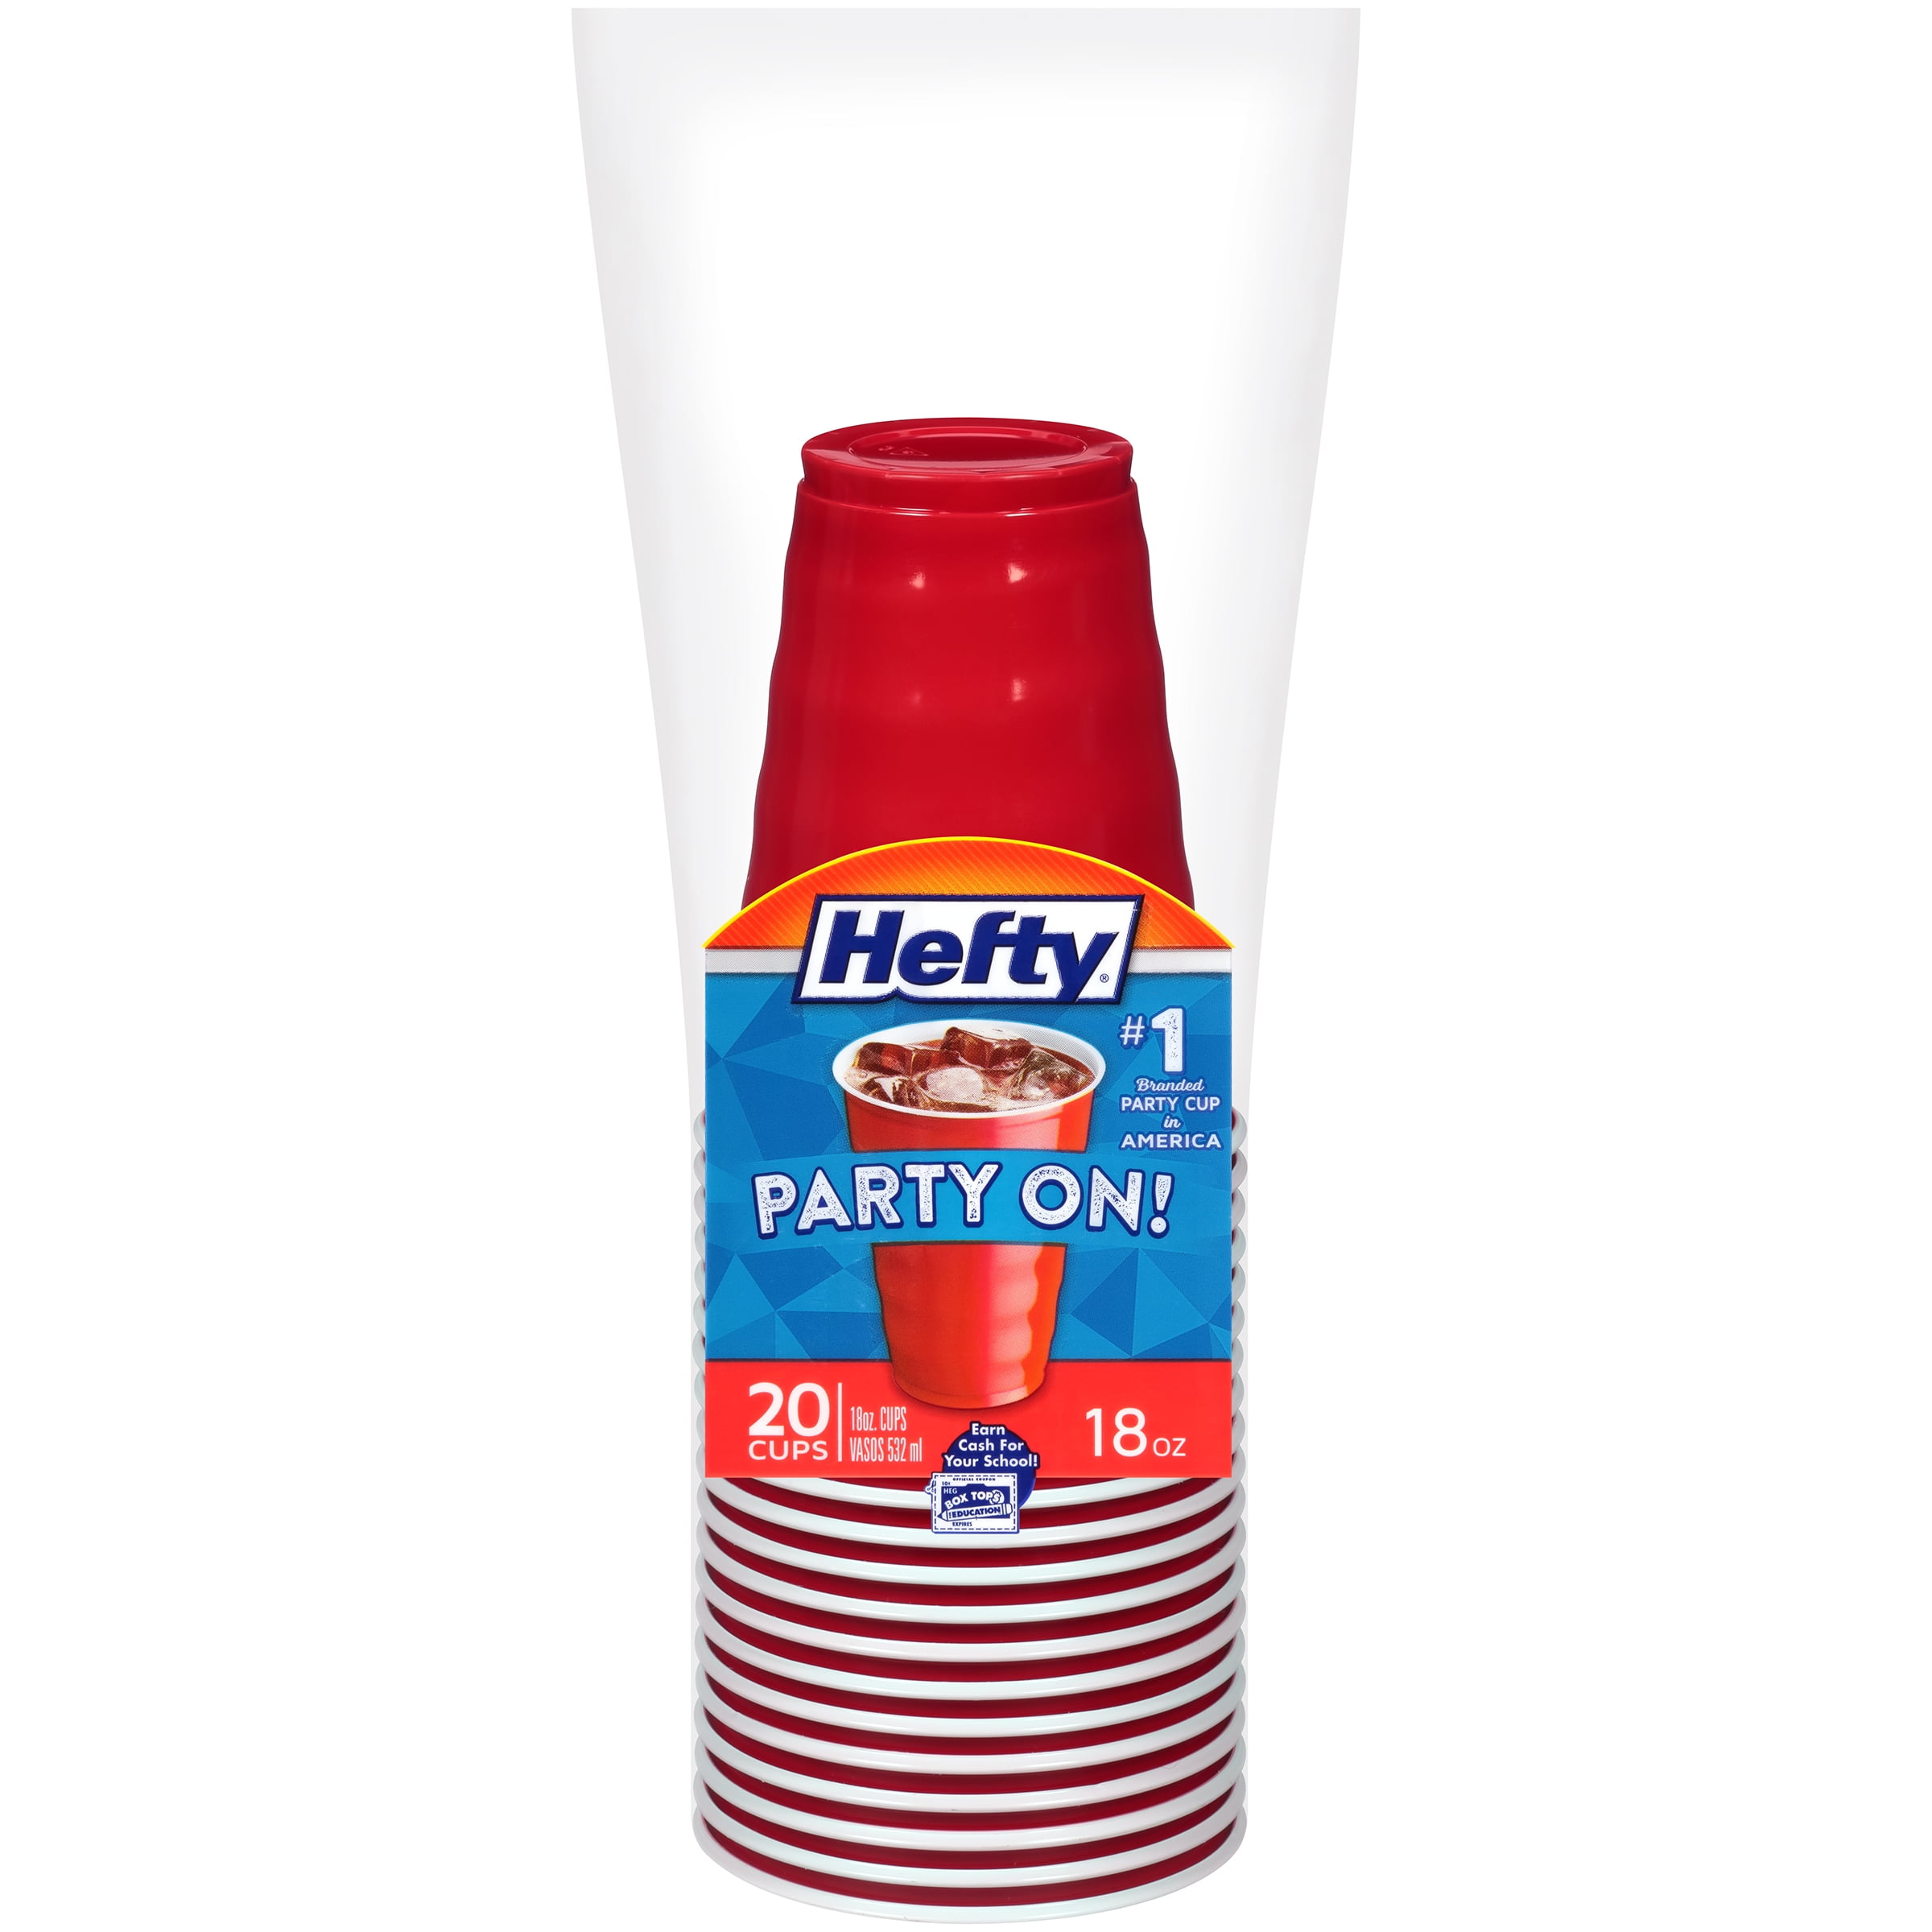 20 MINI-ME 2 ounce RED PARTY CUPS small Plastic shot glass bar cup HEFTY